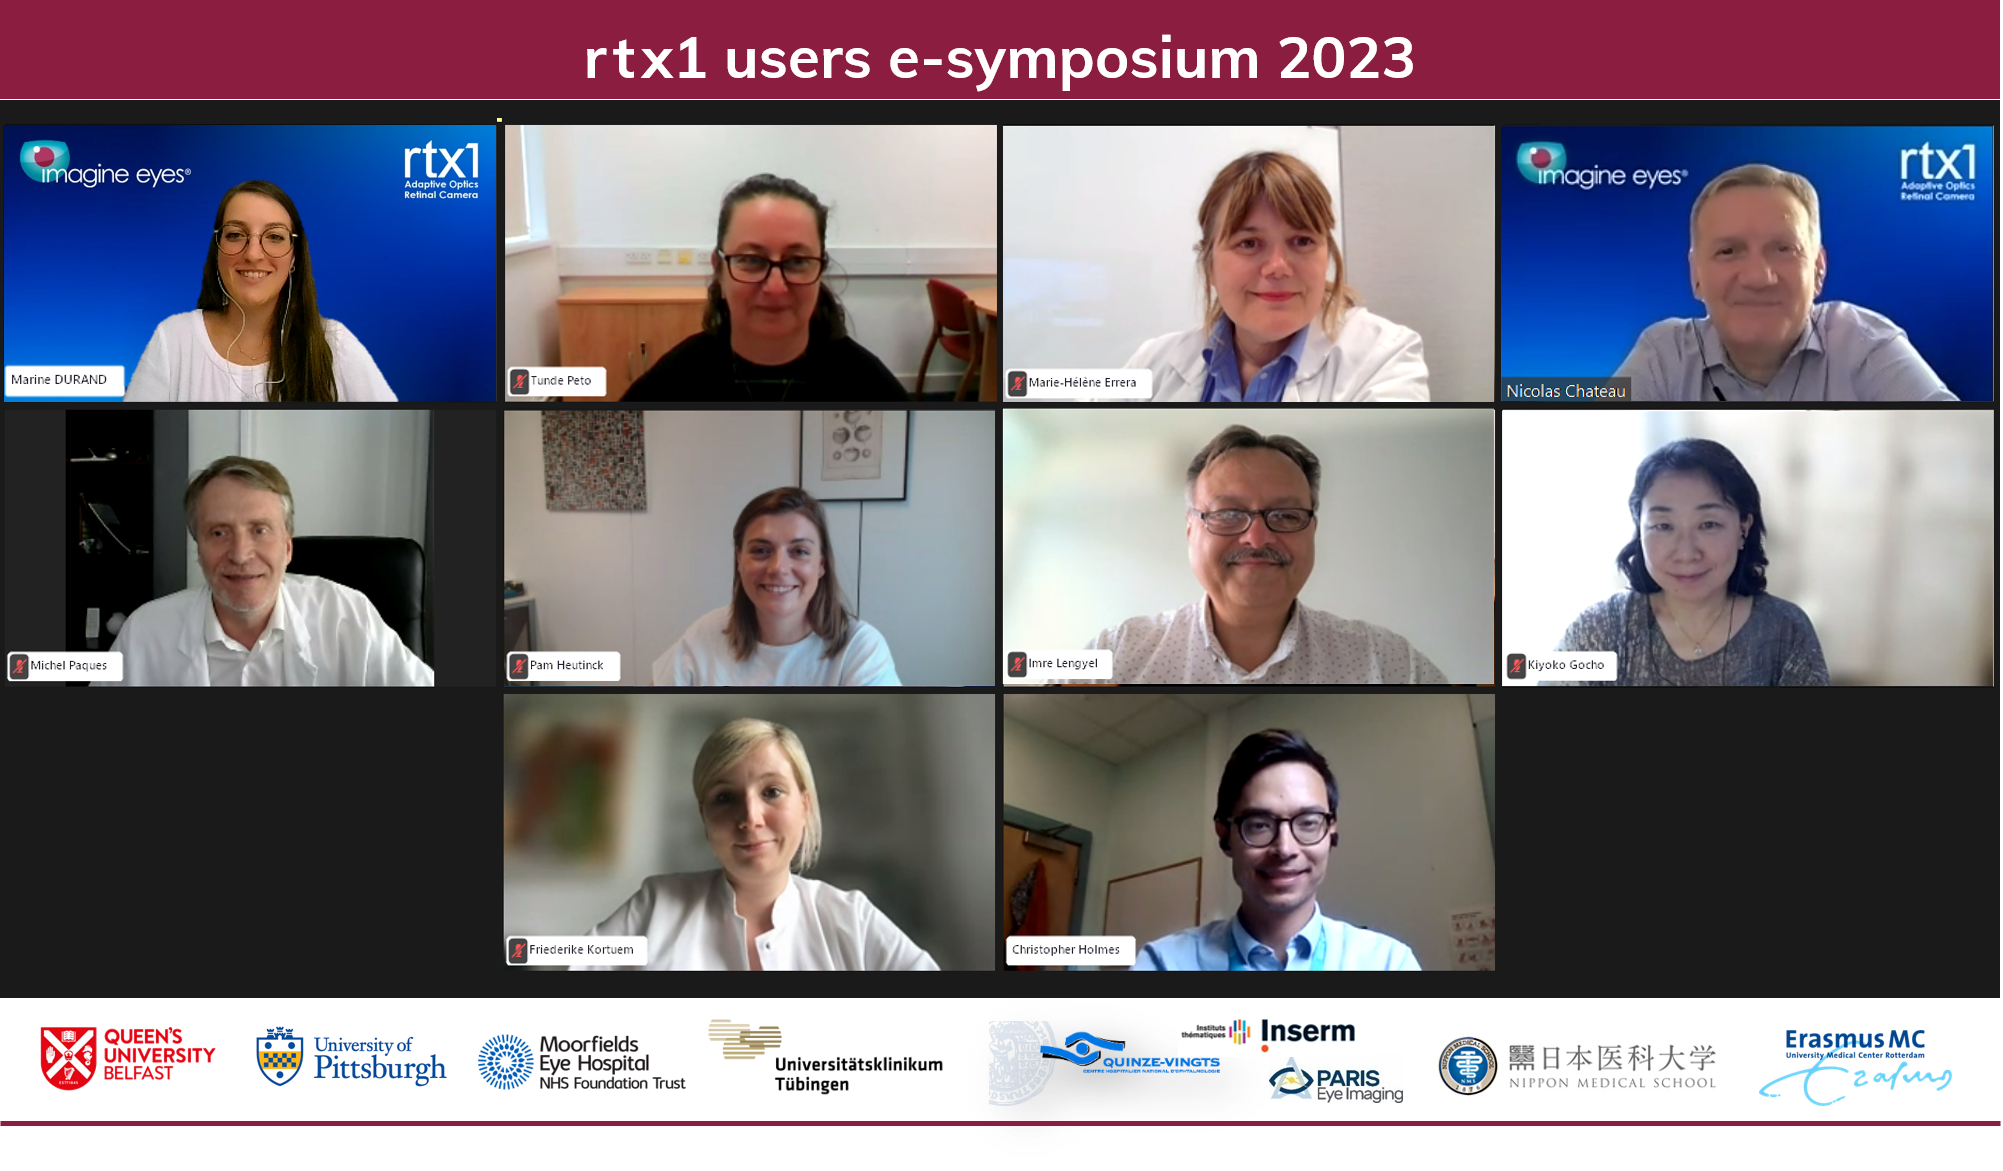 chairs and speakers of the rtx1 users e-symposium 2023